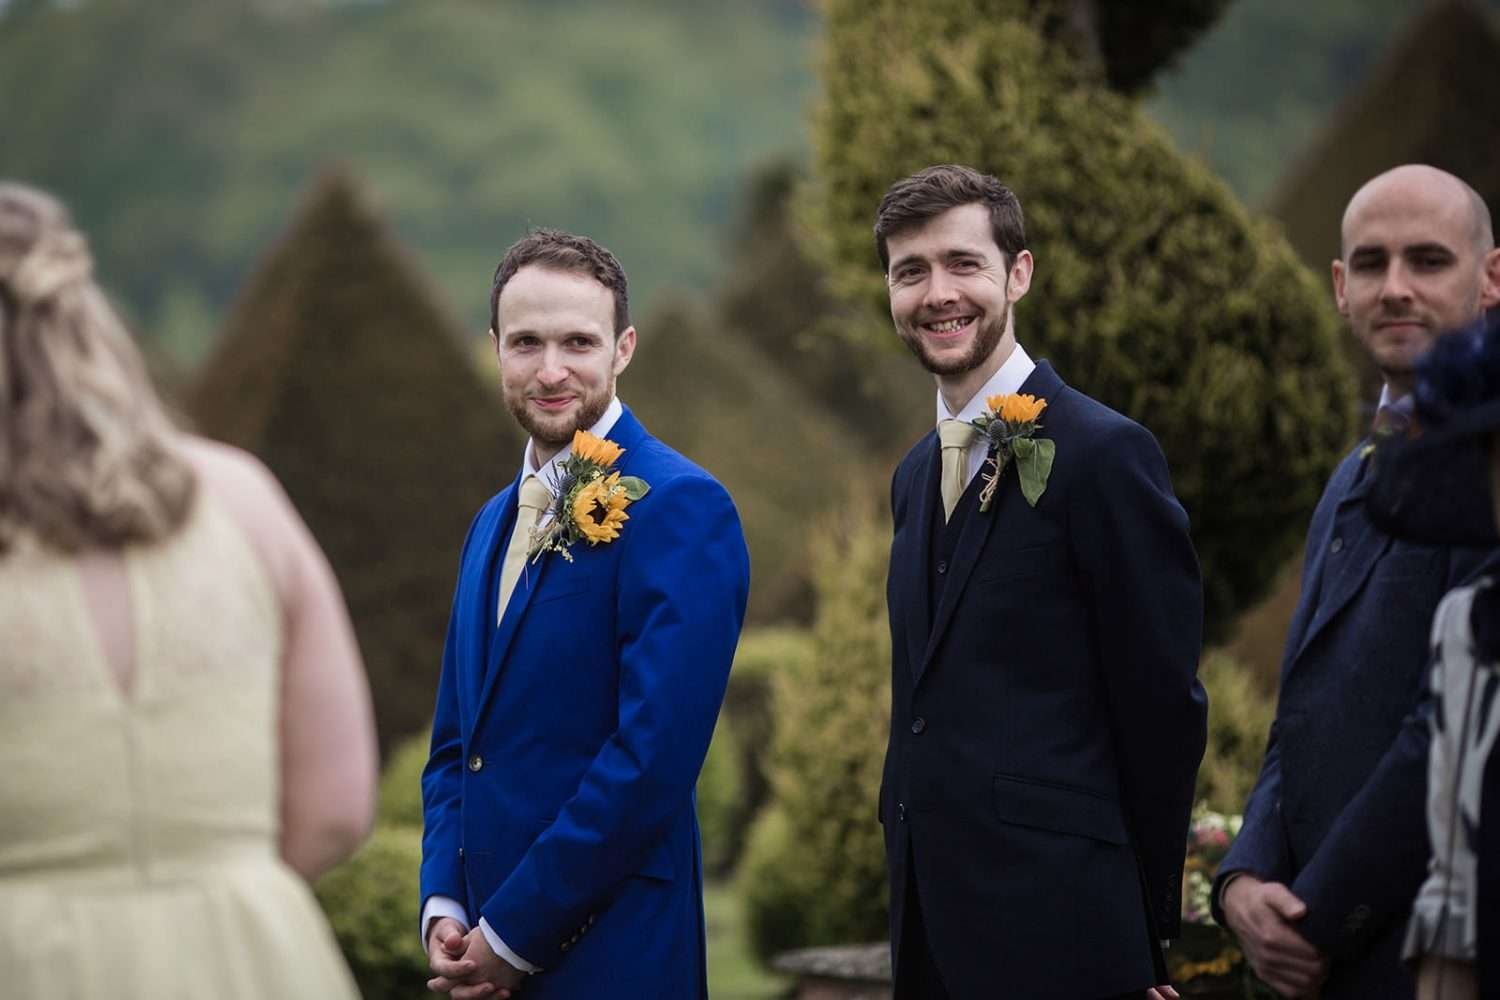 Groom and his best man turn to look as the bride comes down the aisle at her chaucer barn wedding. 
